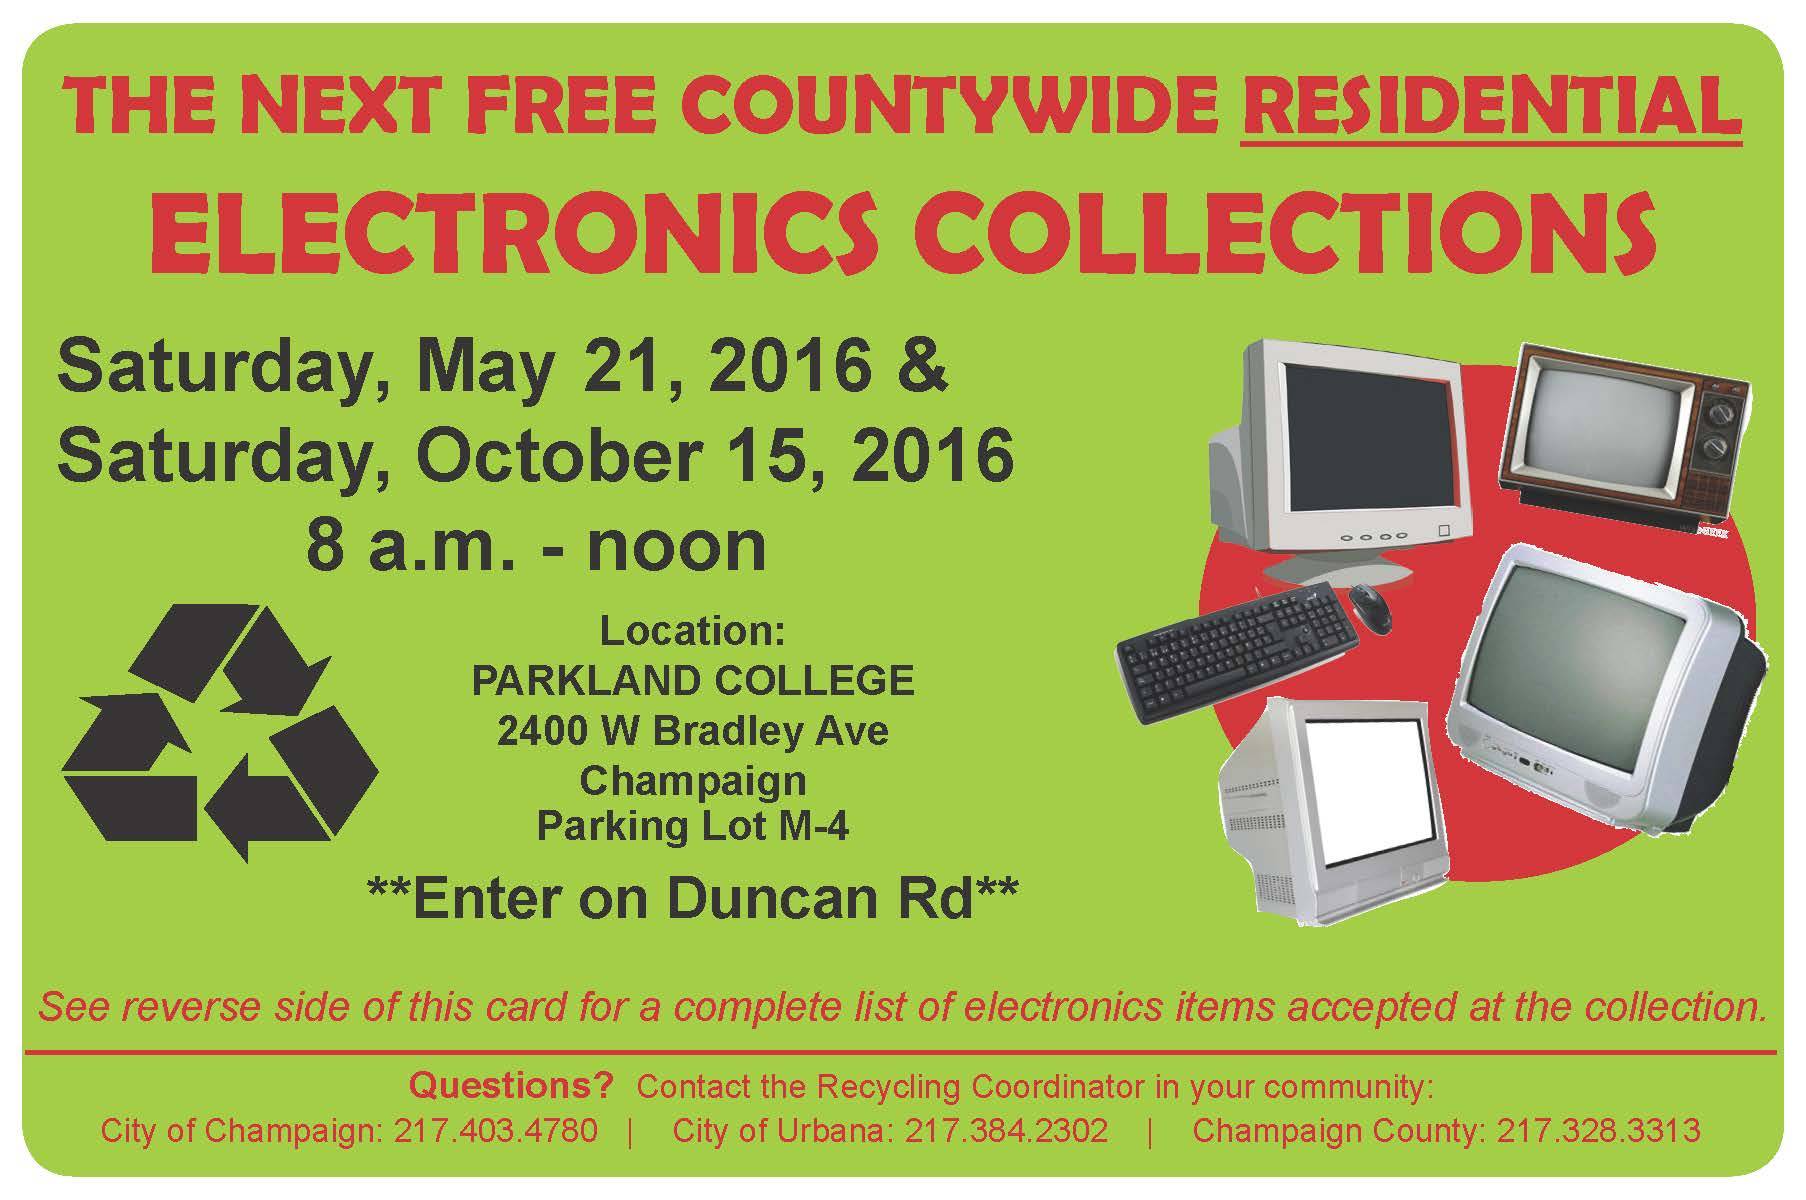 Free county-wide electronic collection happening on May 21st